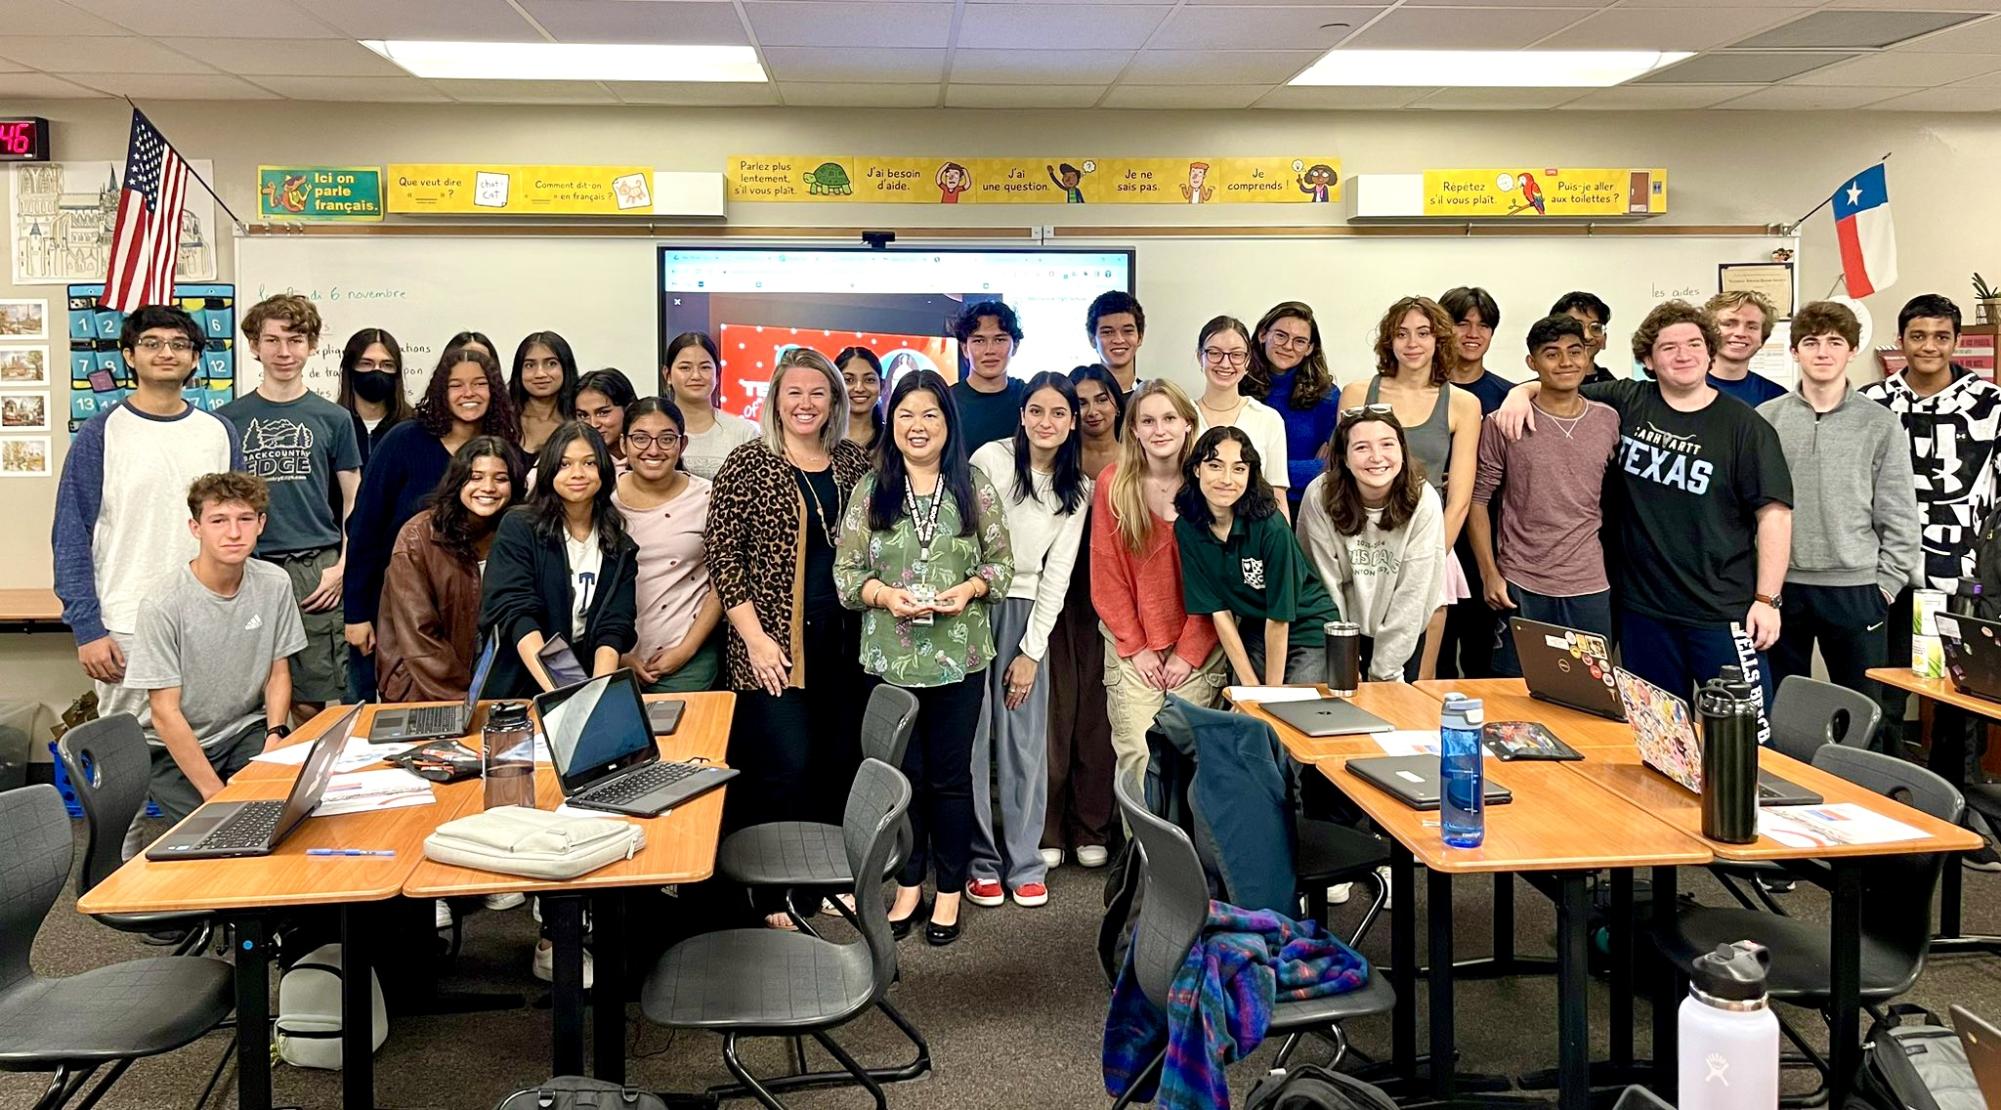 Holding her trophy, Madame Macharia poses for a photo with her fifth block class. On Nov. 4, Mme Macharia was named the Texas Foreign Language Teacher of the Year at the Texas Foreign Language Association Conference.